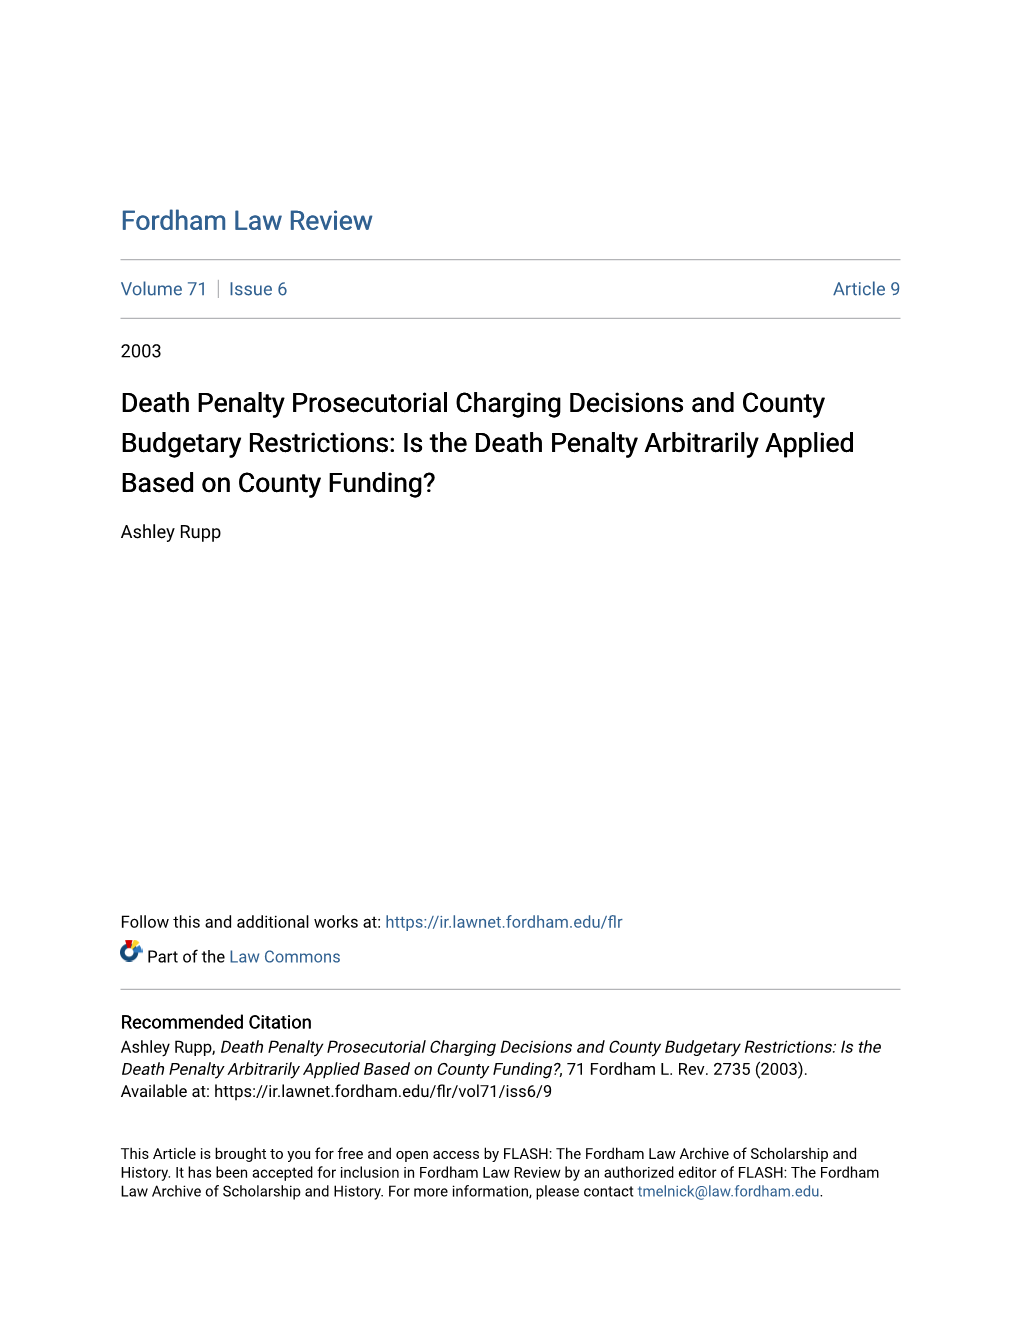 Death Penalty Prosecutorial Charging Decisions and County Budgetary Restrictions: Is the Death Penalty Arbitrarily Applied Based on County Funding?